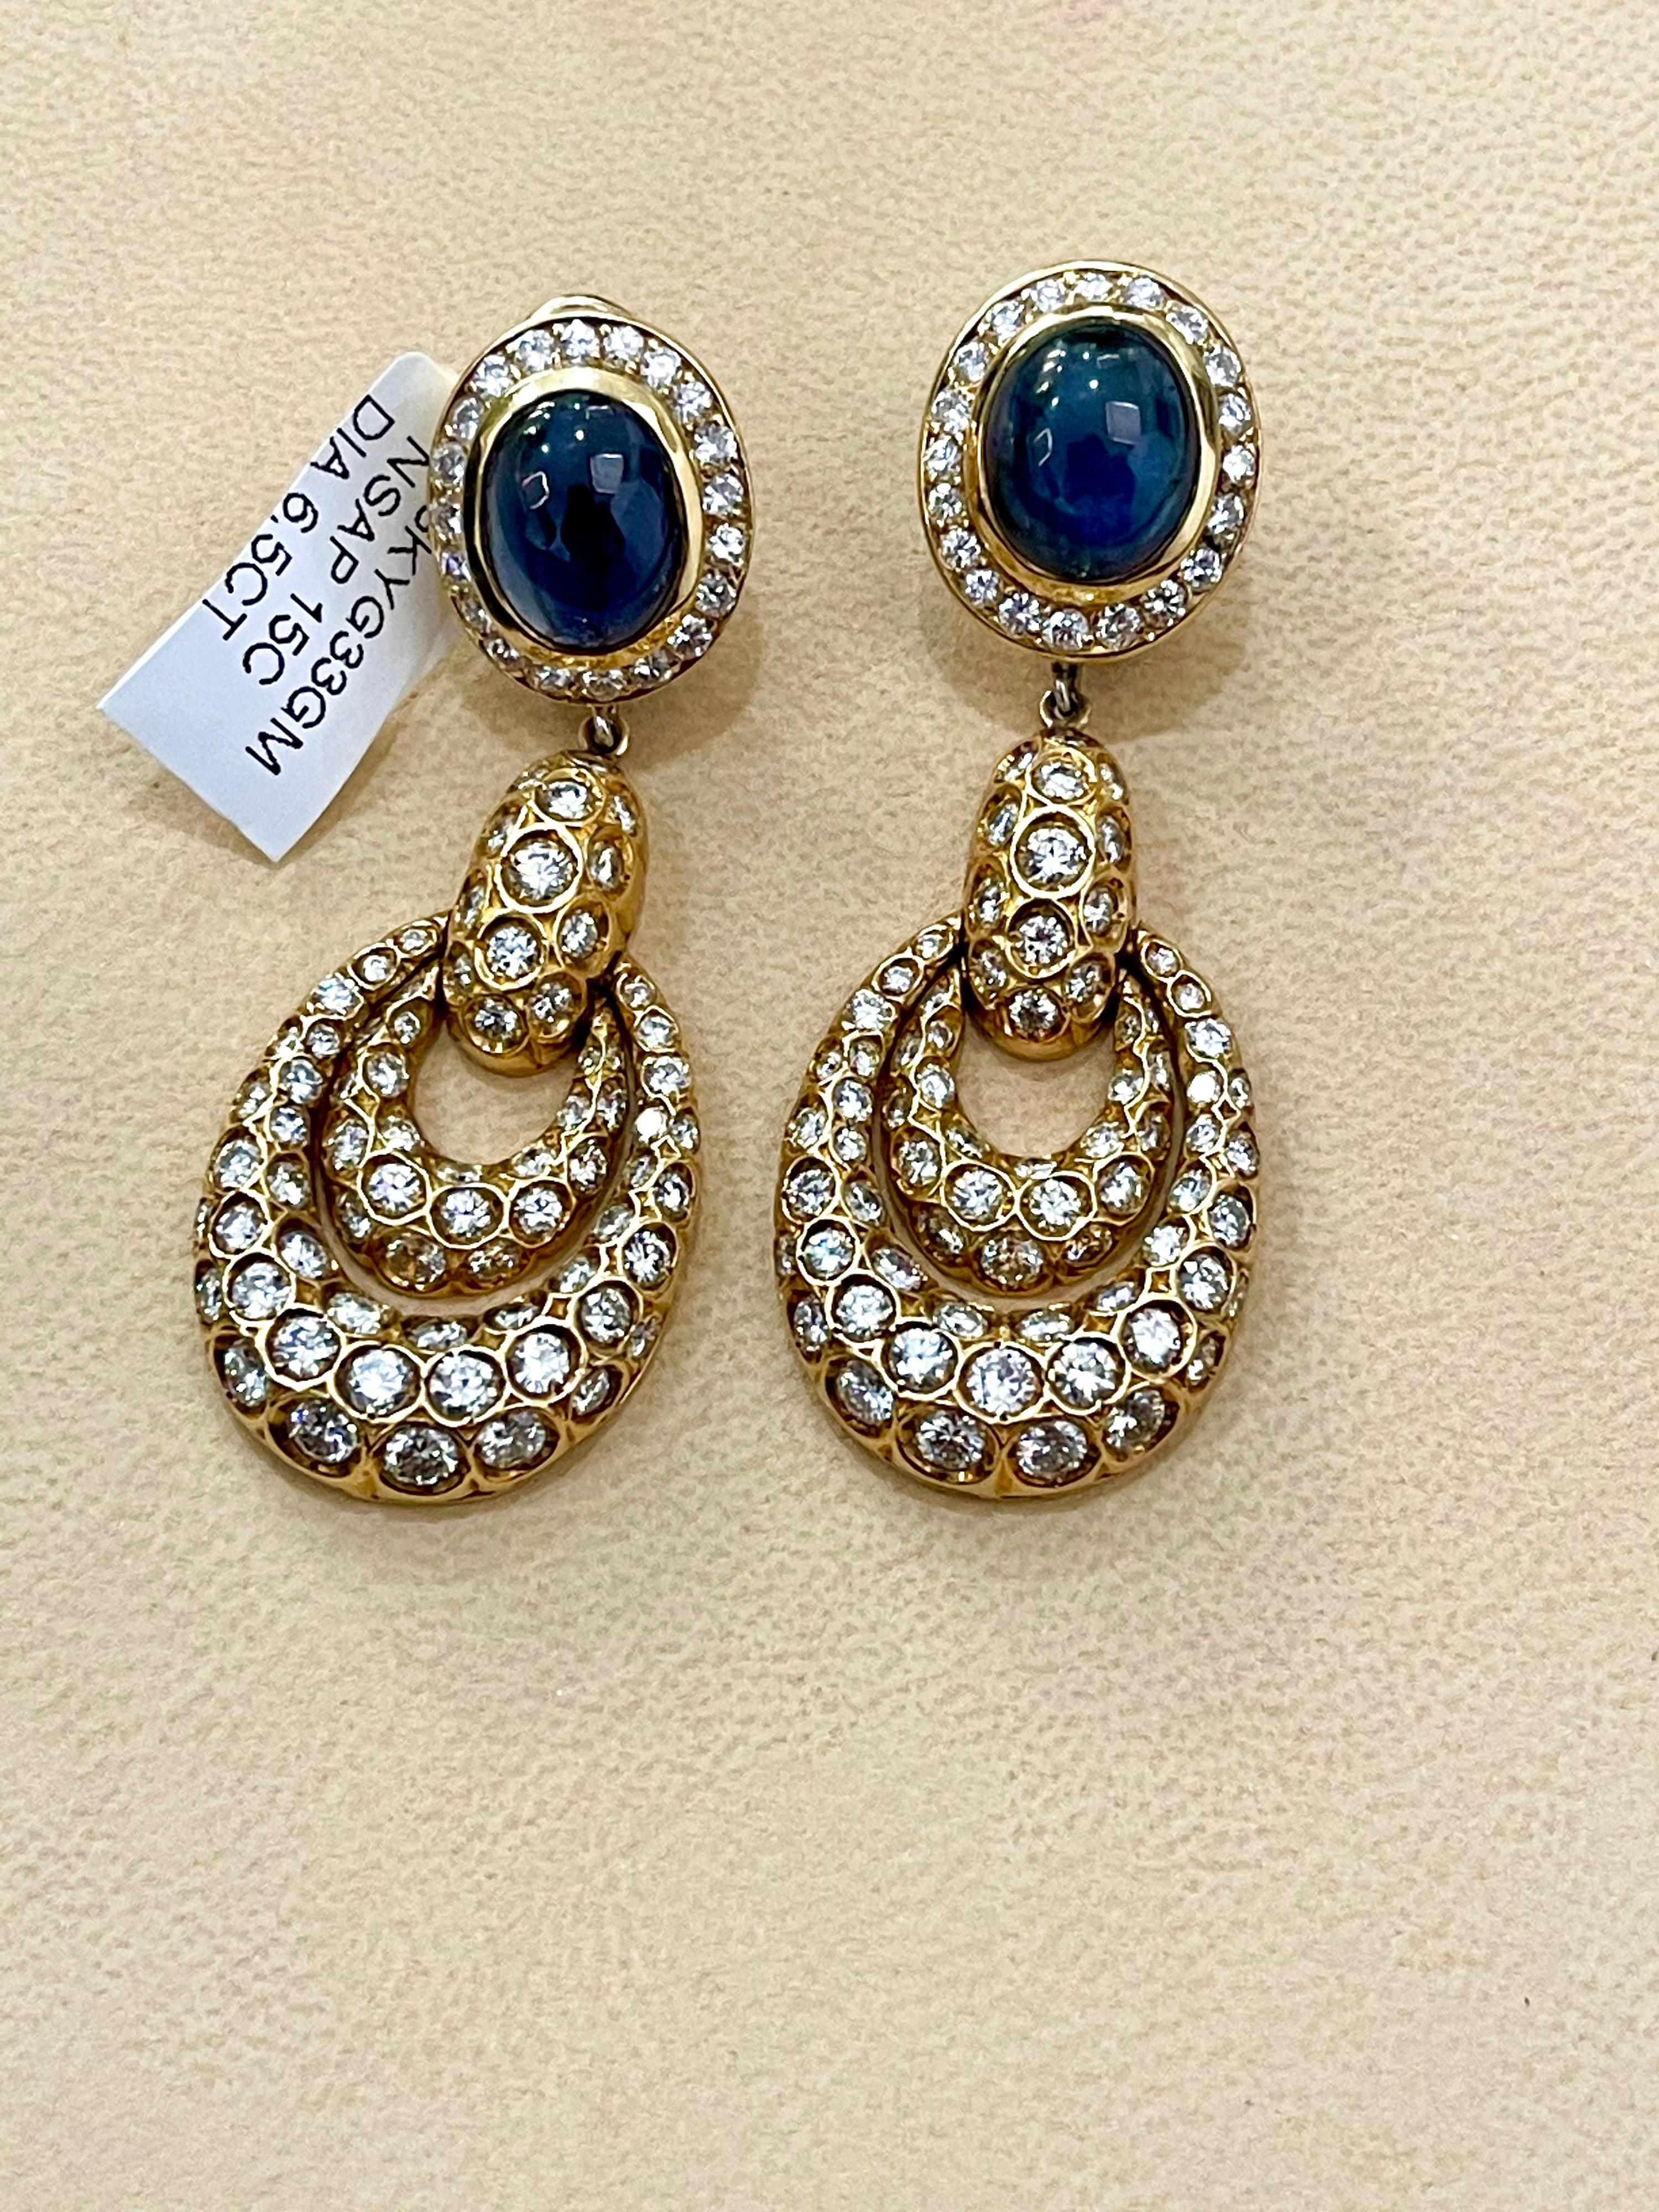 15 Carat Blue Sapphire and Diamond Hanging /Cocktail/Drop Earring 18 Karat Gold For Sale 8